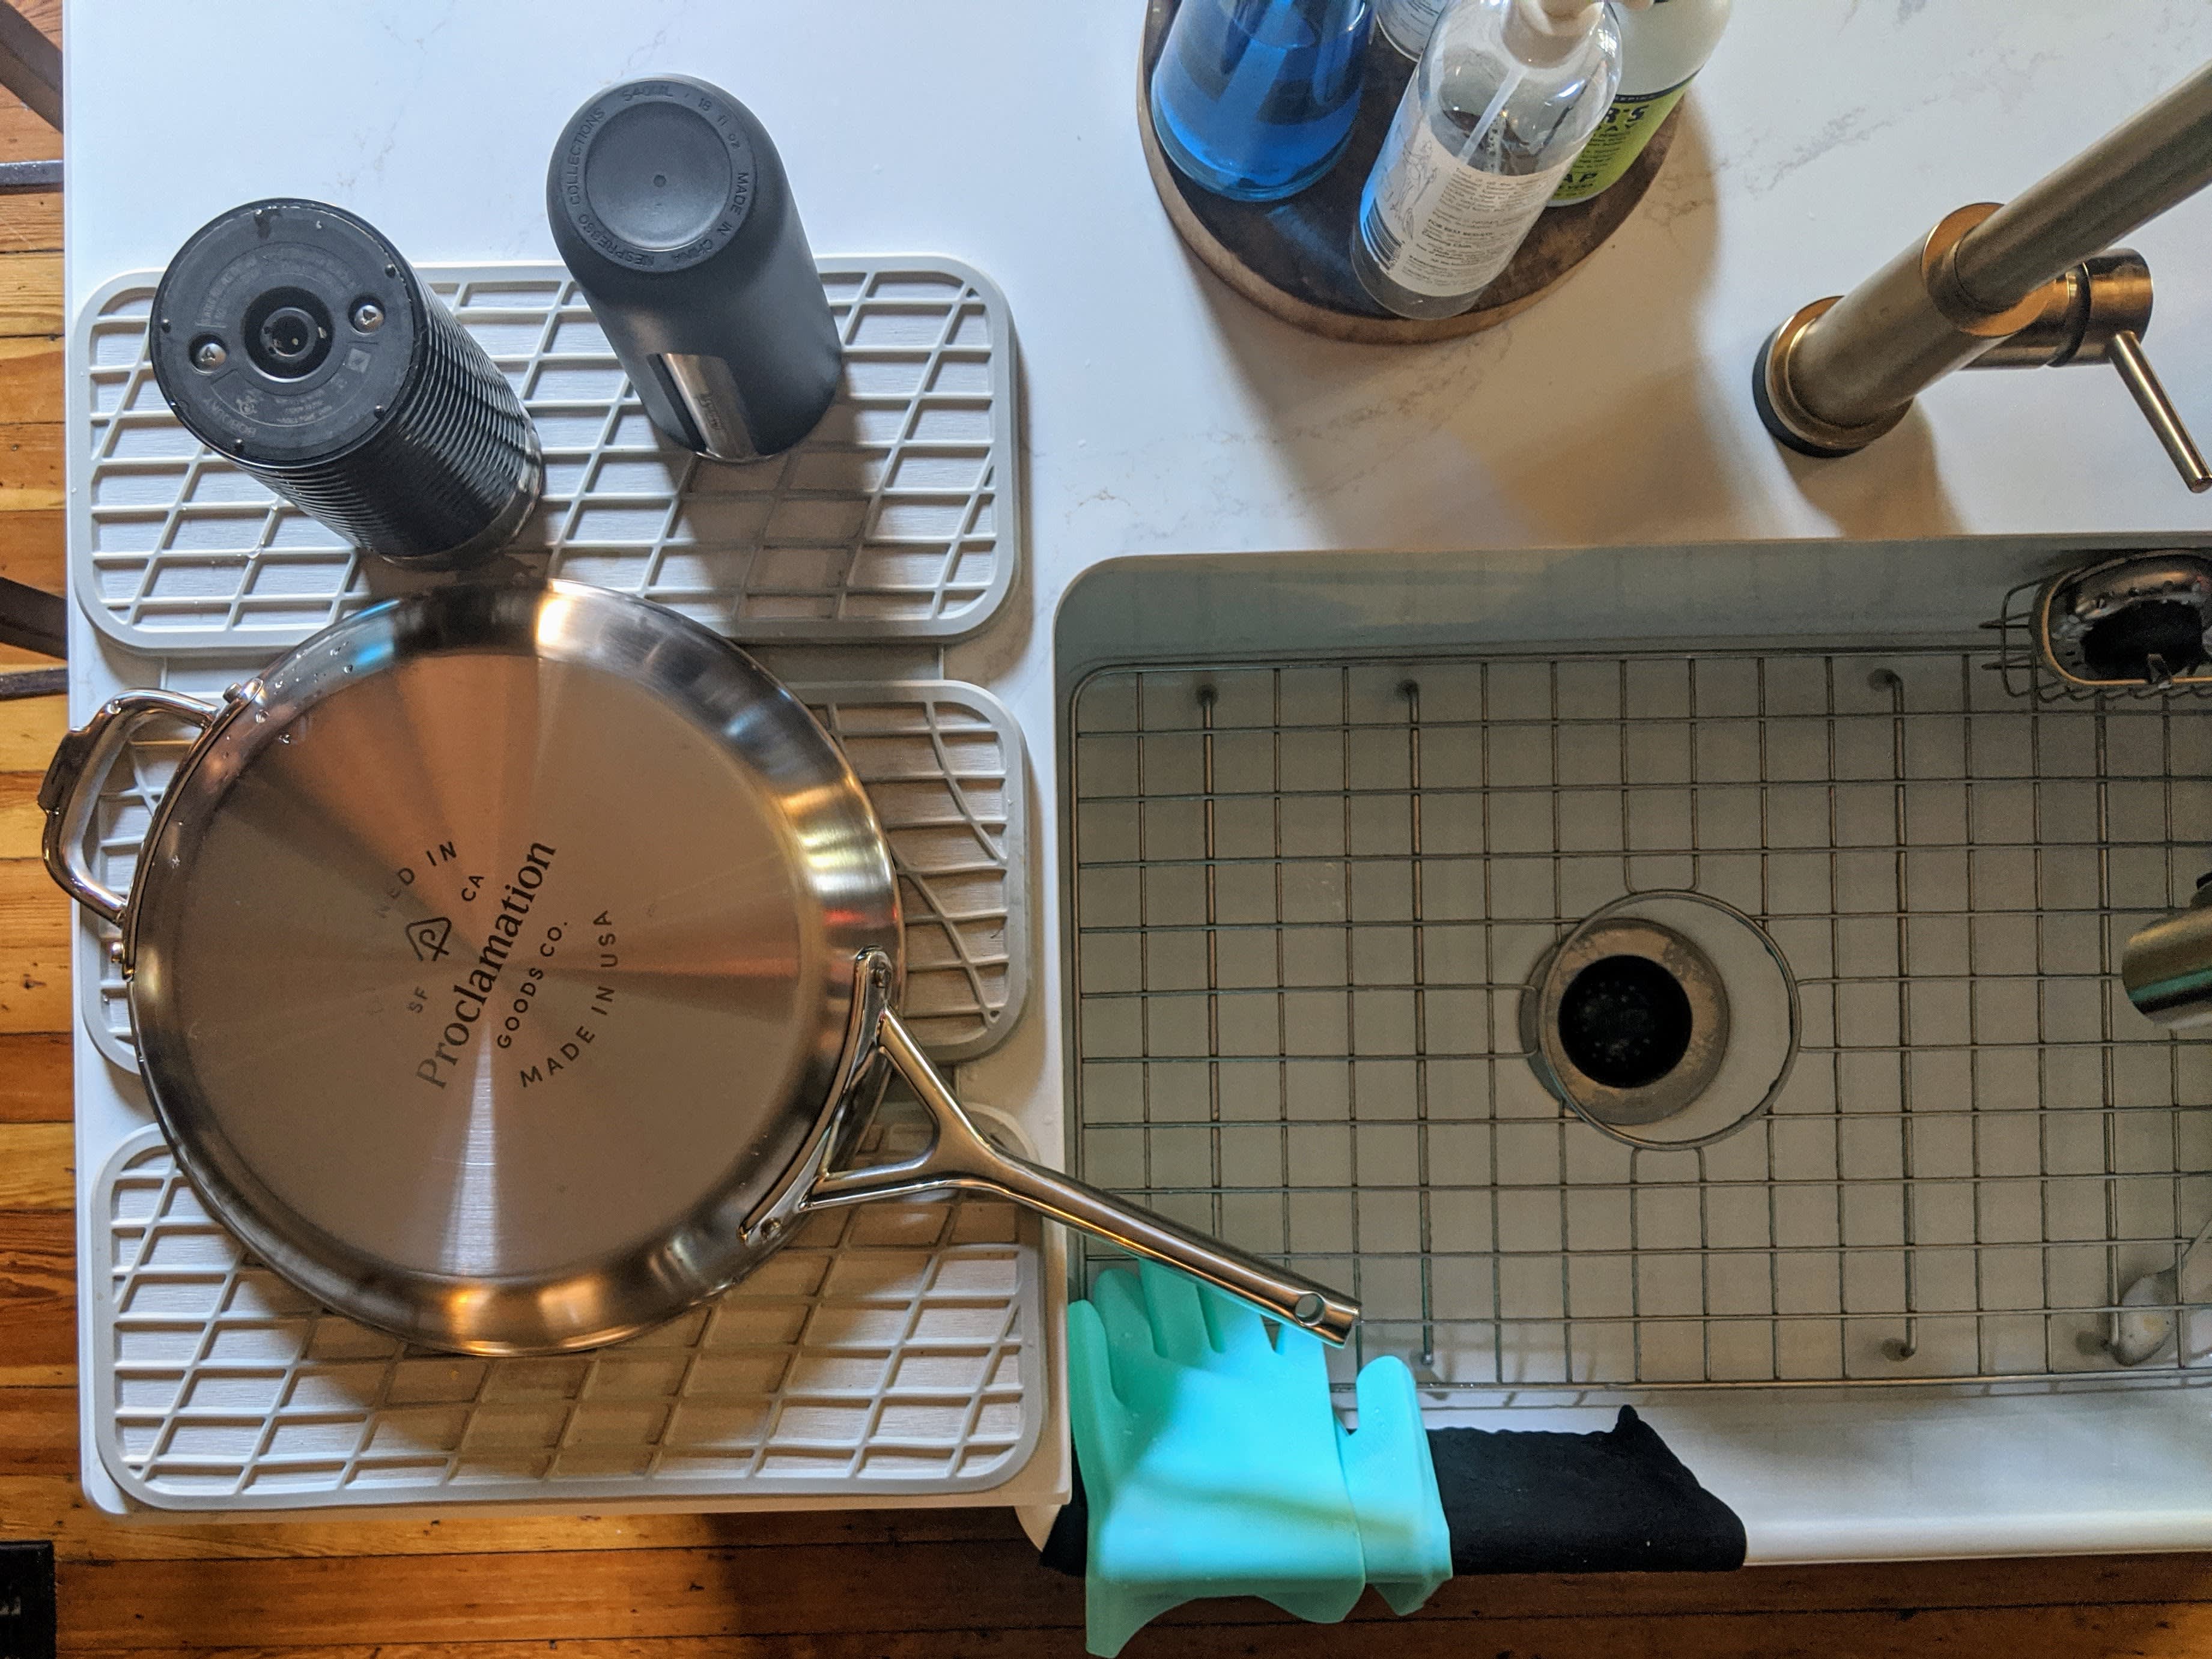 Dorai Home Dish Pad Review: Cut mold, mildew, and bacteria out of